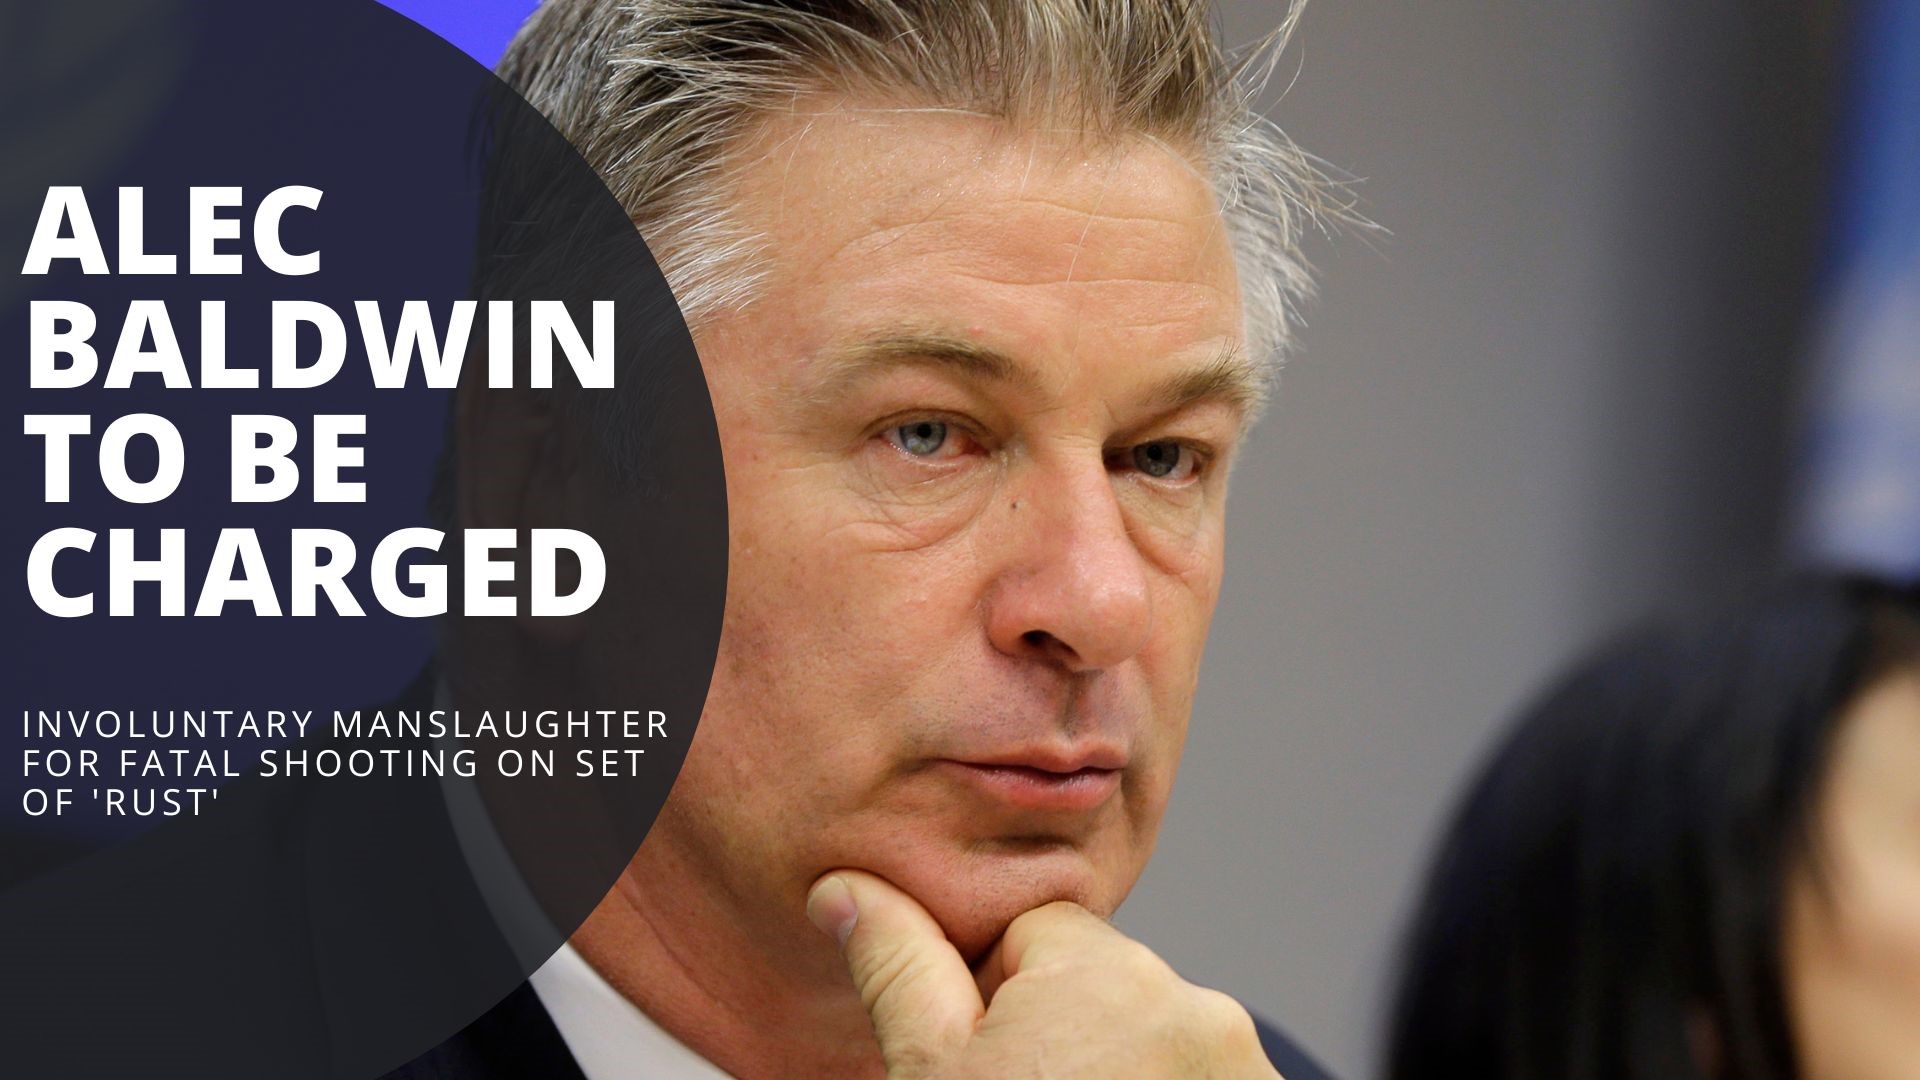 A special looking at the charges against Alec Baldwin in the 'Rust' fatal shooting, as well as a look back at what happened in October 2021.